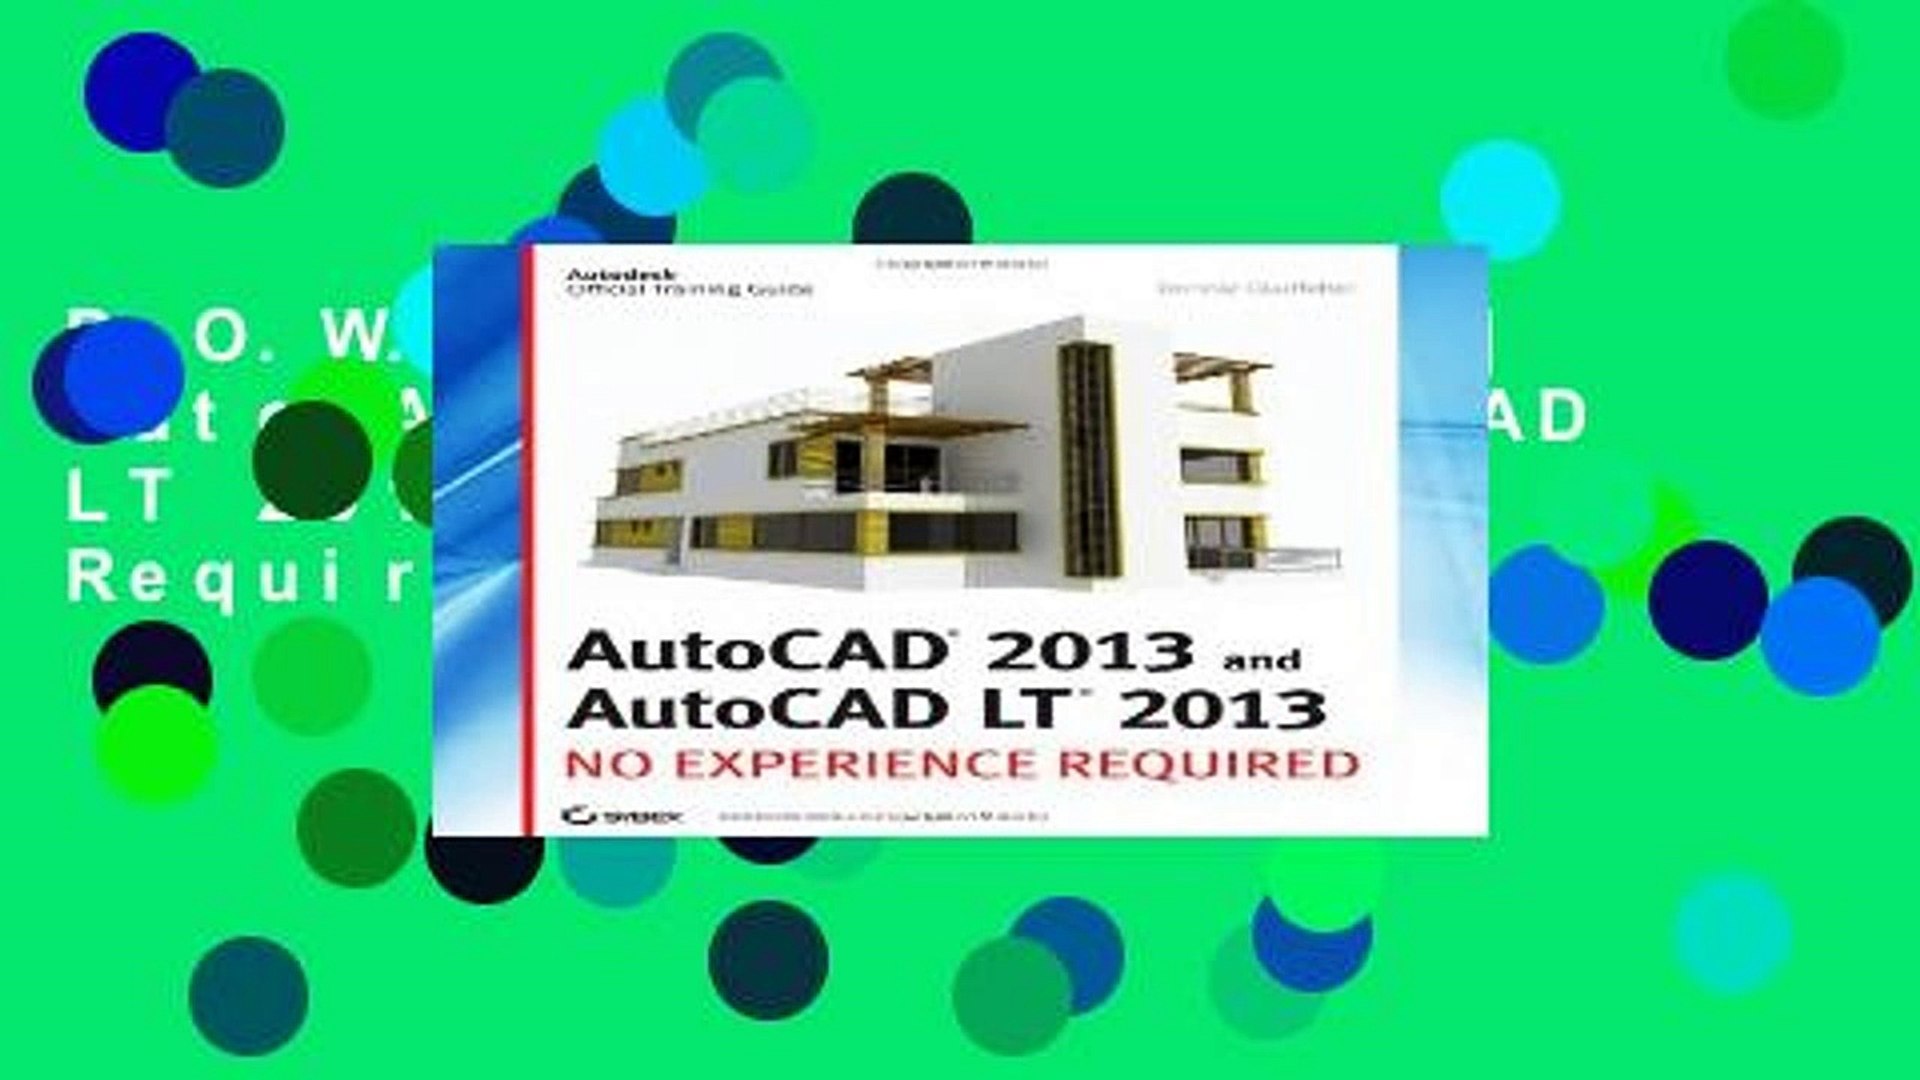 D O W N L O A D P D F Autocad 13 And Autocad Lt 13 No Experience Required Autodesk Video Dailymotion